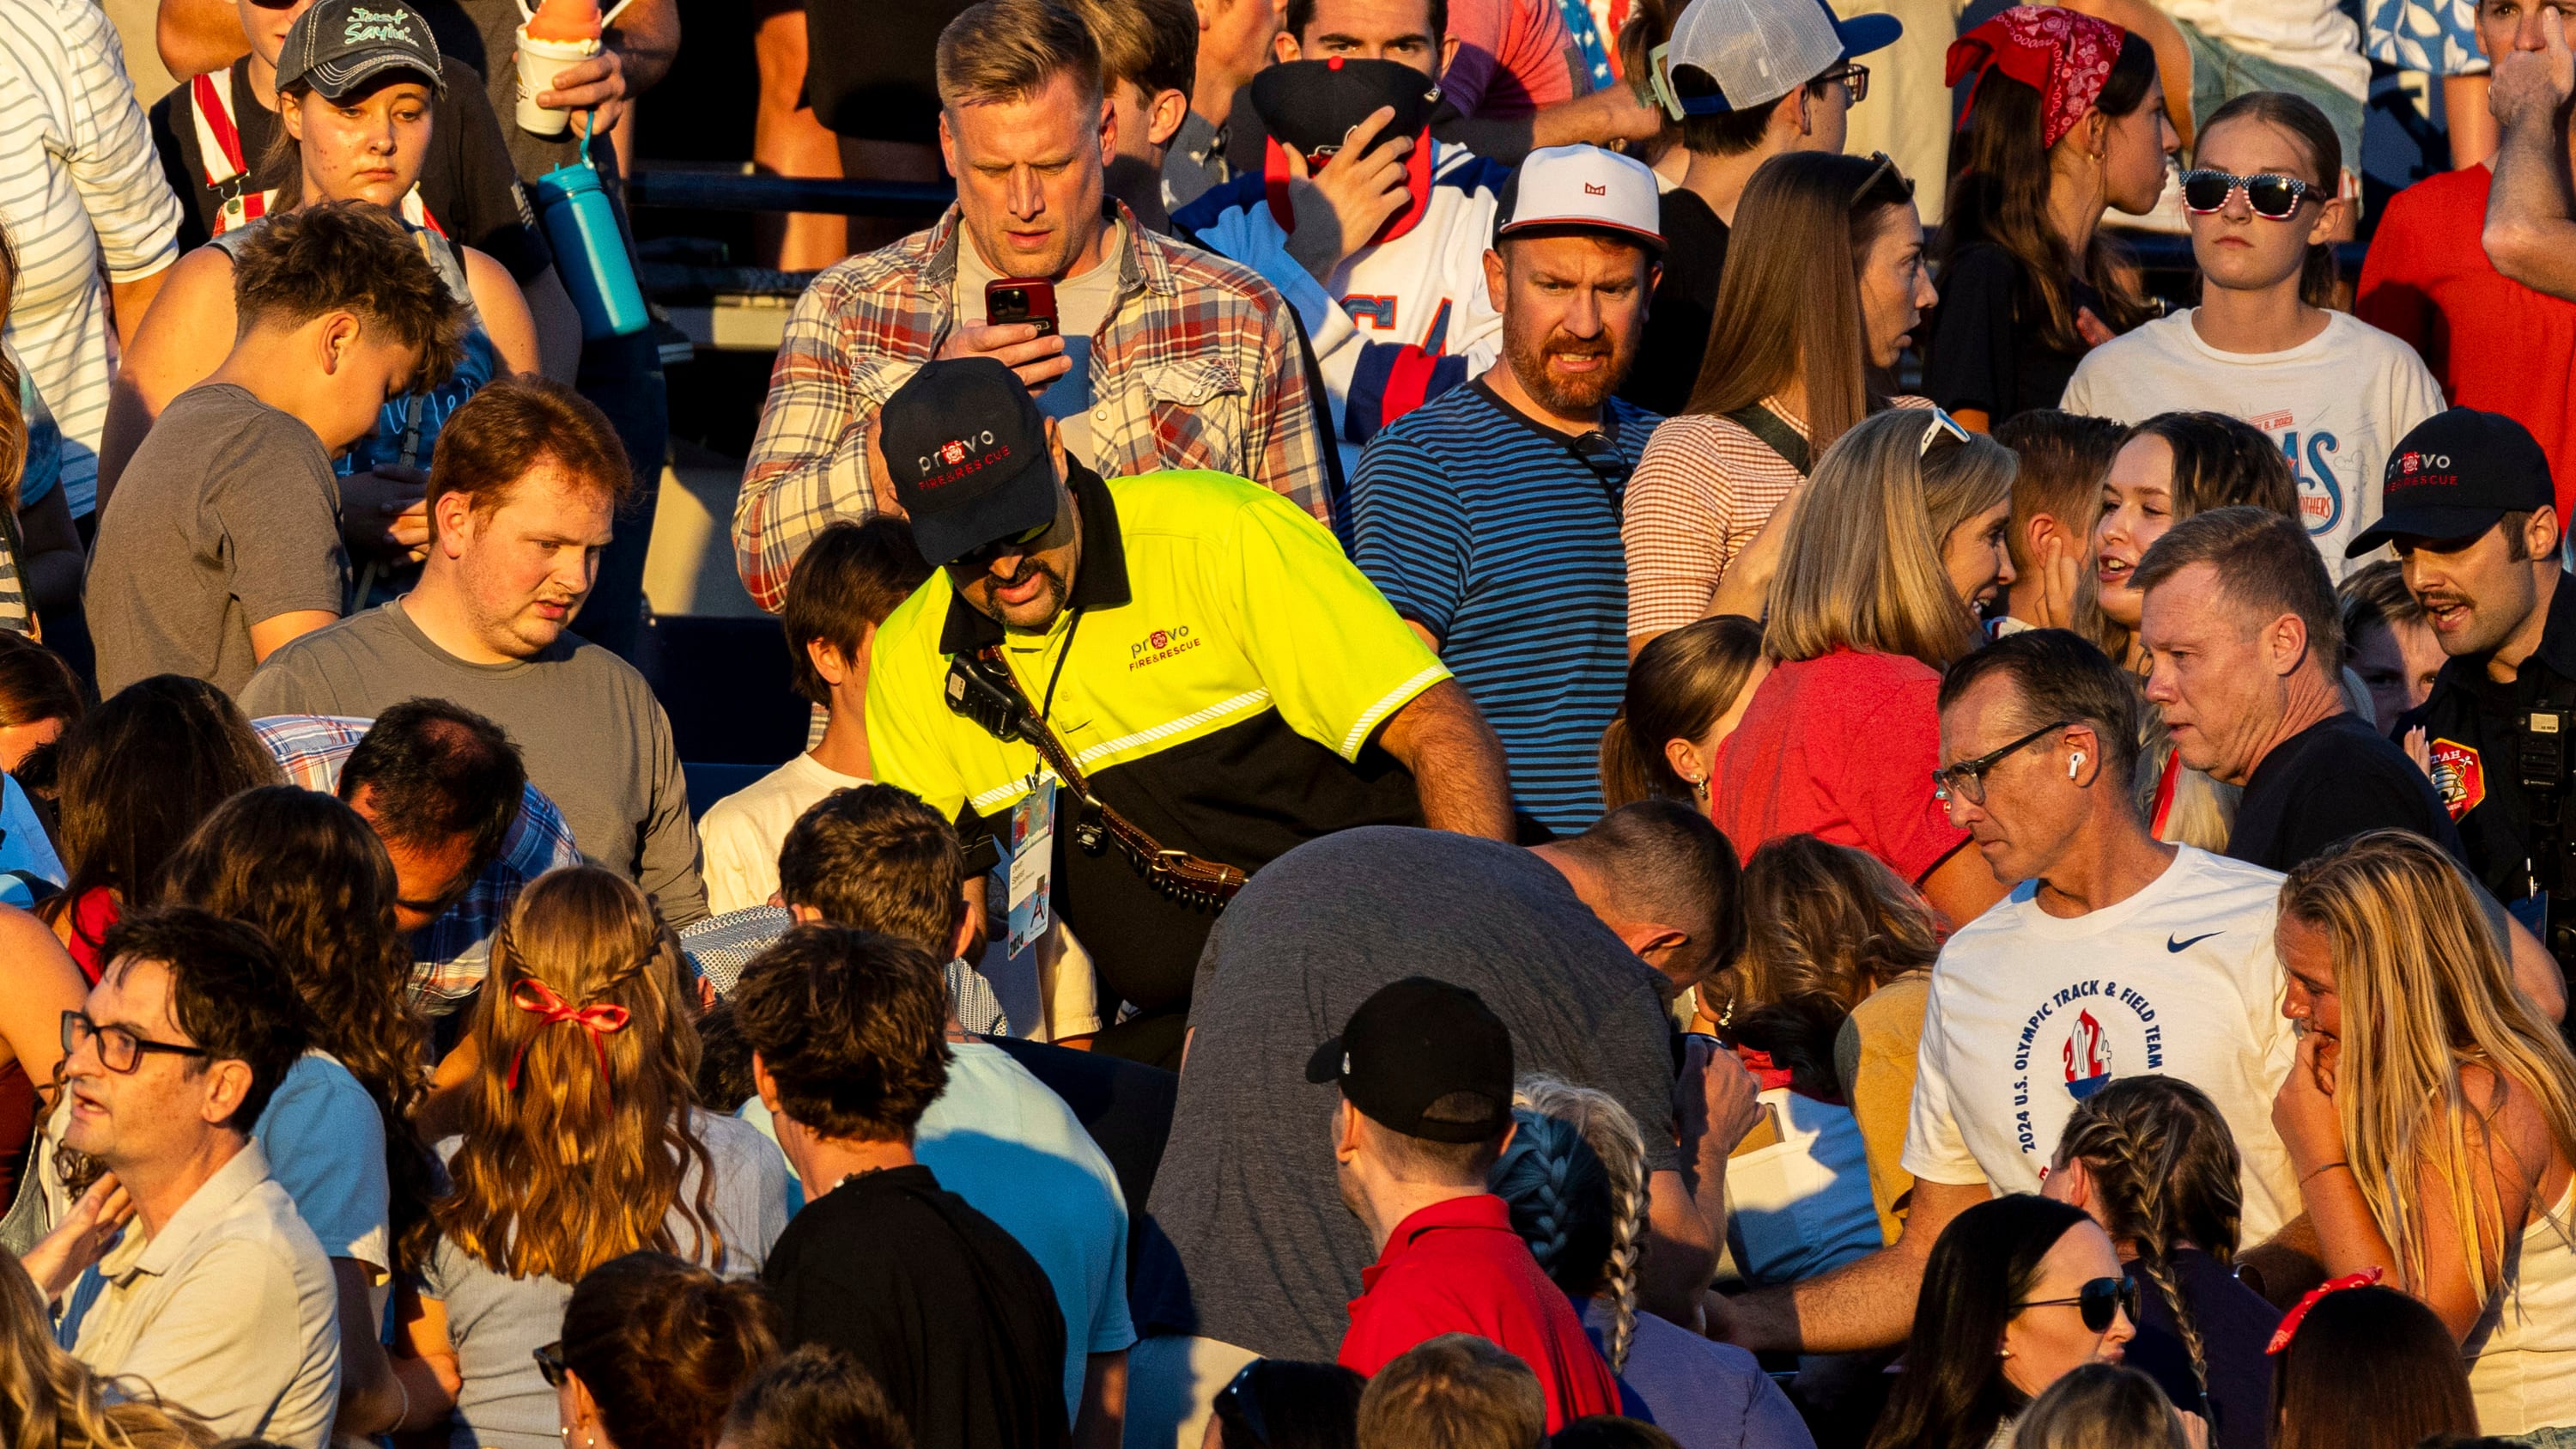 The crowd watches as a firefighter searches for an injured individual after an errant firework exploded among attendees during Stadium of Fire held at LaVell Edwards Stadium in Provo, Utah (Isaac Hale/AP)